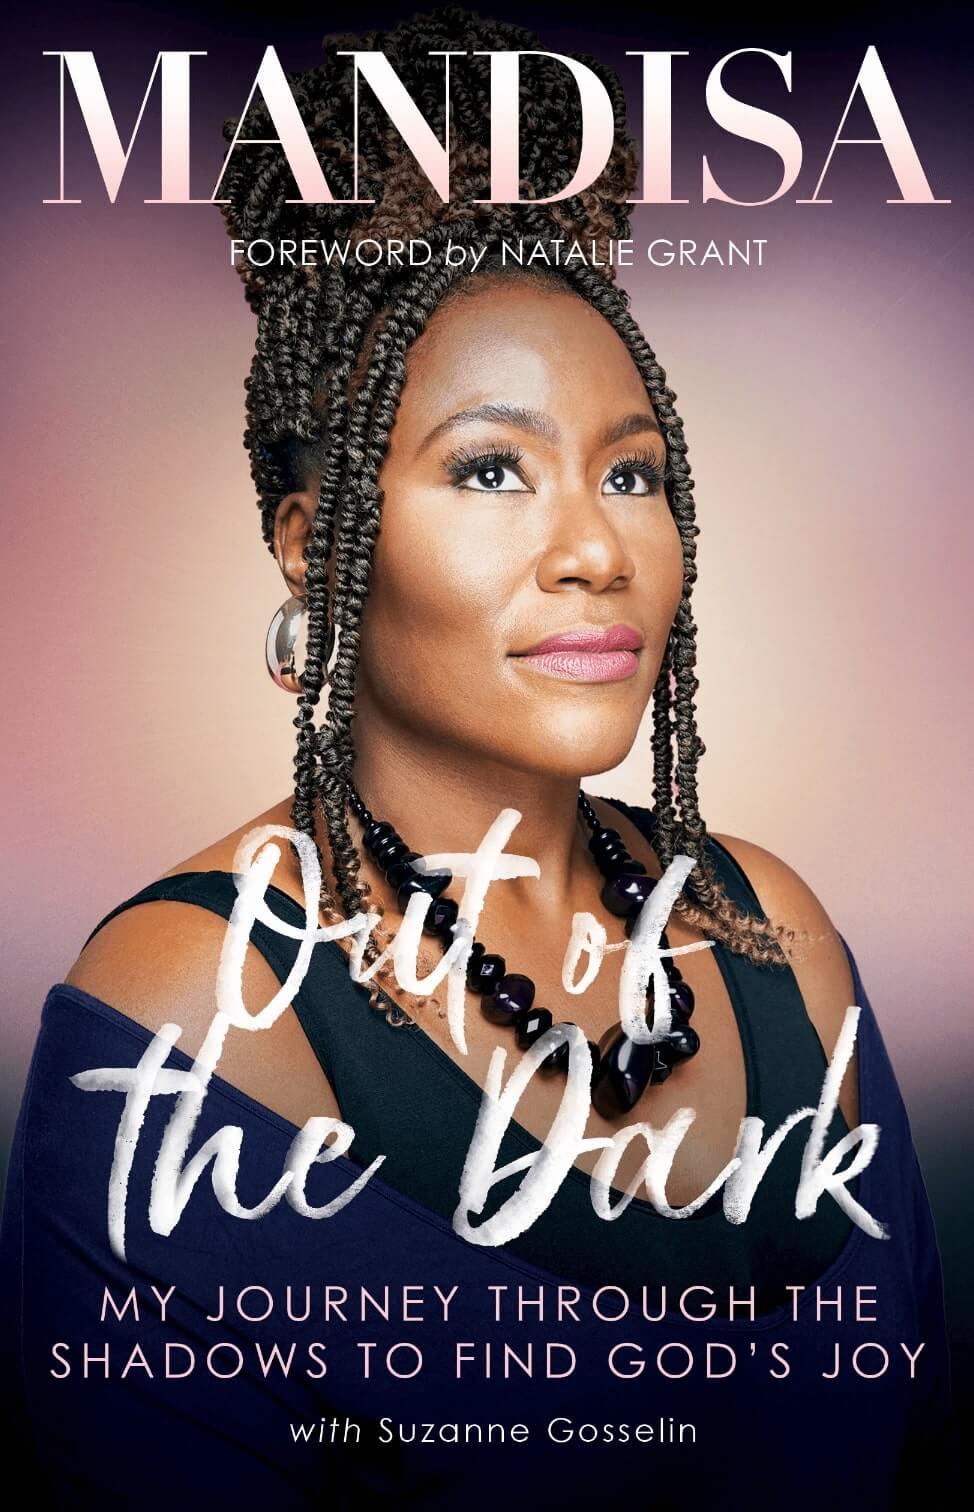 Cover of the book "Out of the Dark: My Journey Through the Shadows to Find God's Joy"